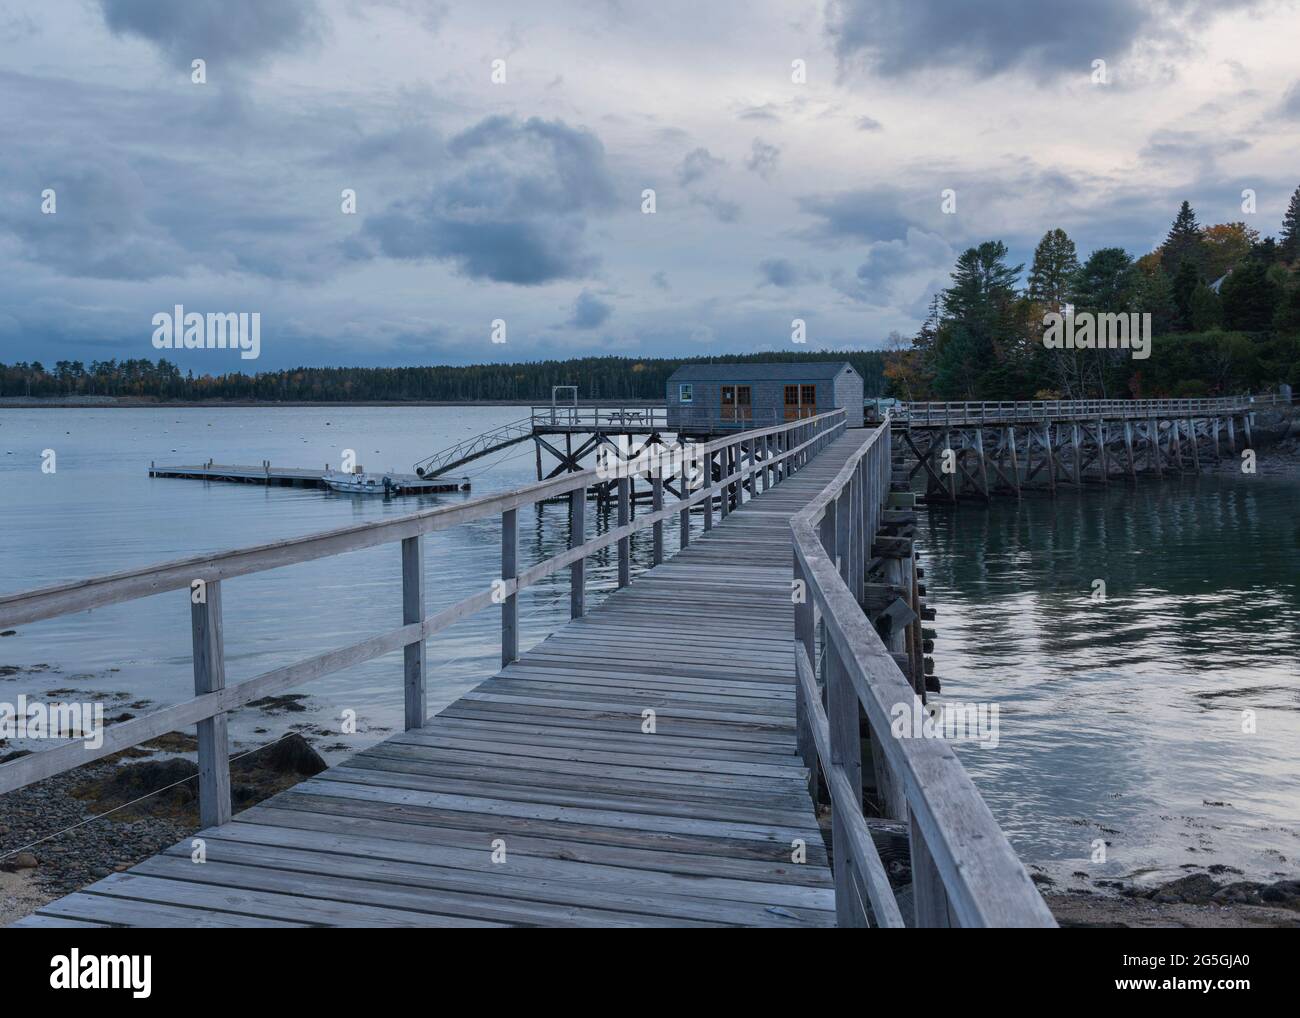 In Northeast Harbor, Maine, a Raised Wooden Boardwalk at Gilpatrick Cove Inlet Leads to a Shack and the Floating Dock Halfway Across. Stock Photo